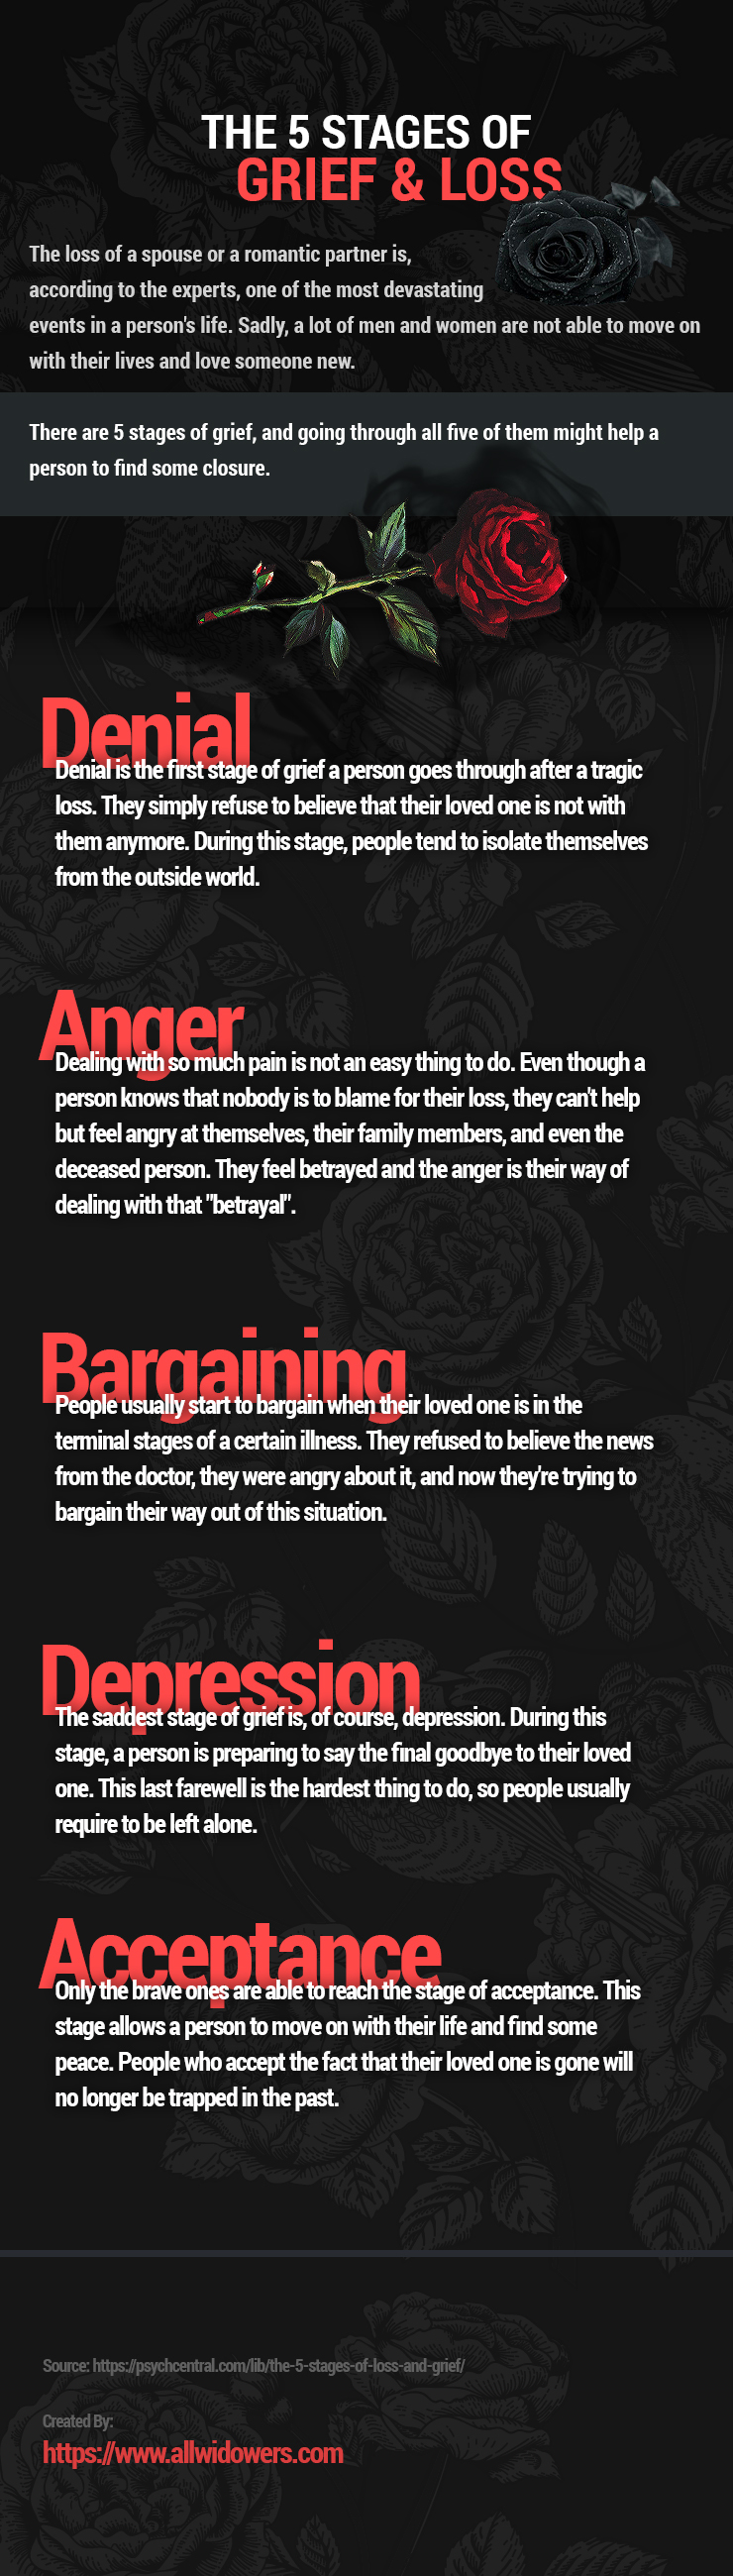 The 5 Stages of Grief & Loss